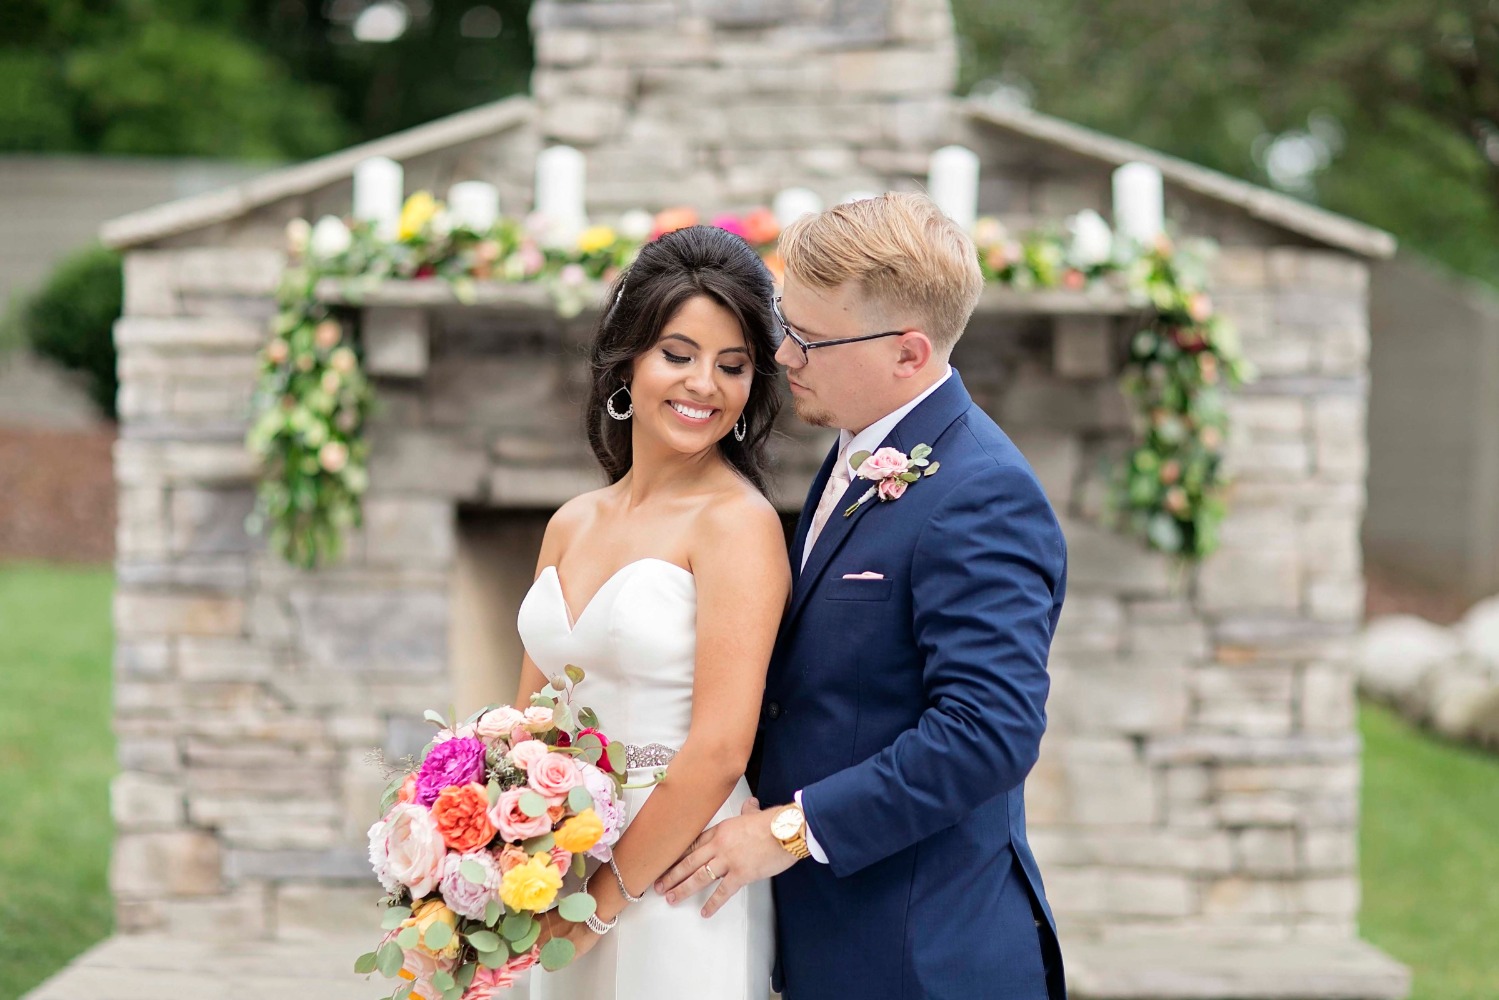 wedding couple with outdoor fireplace ceremony backdrop